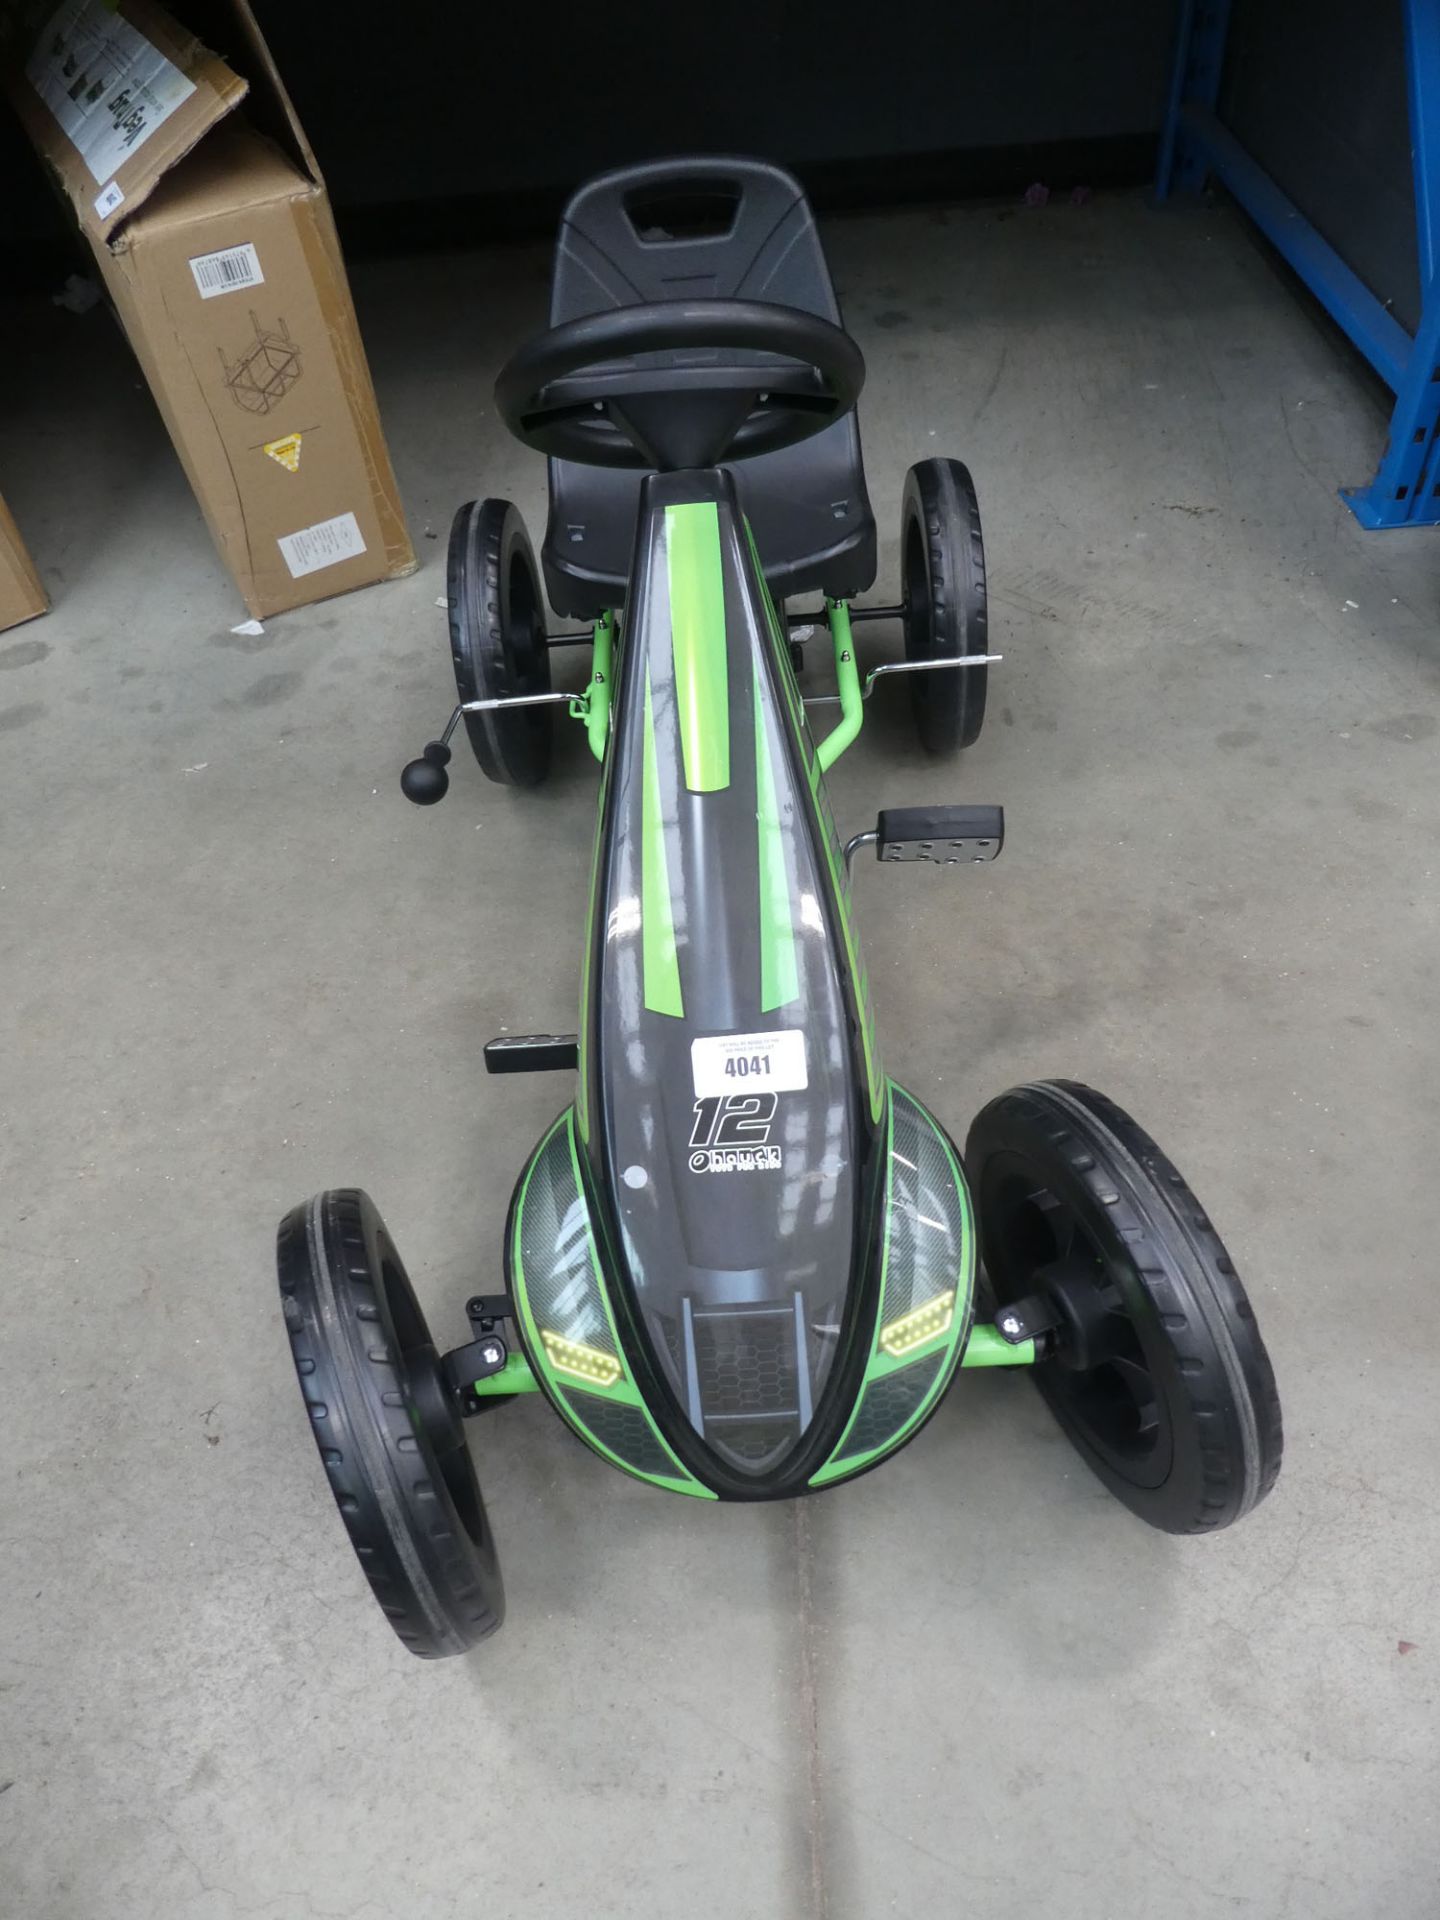 Hauck green and black pedal go kart